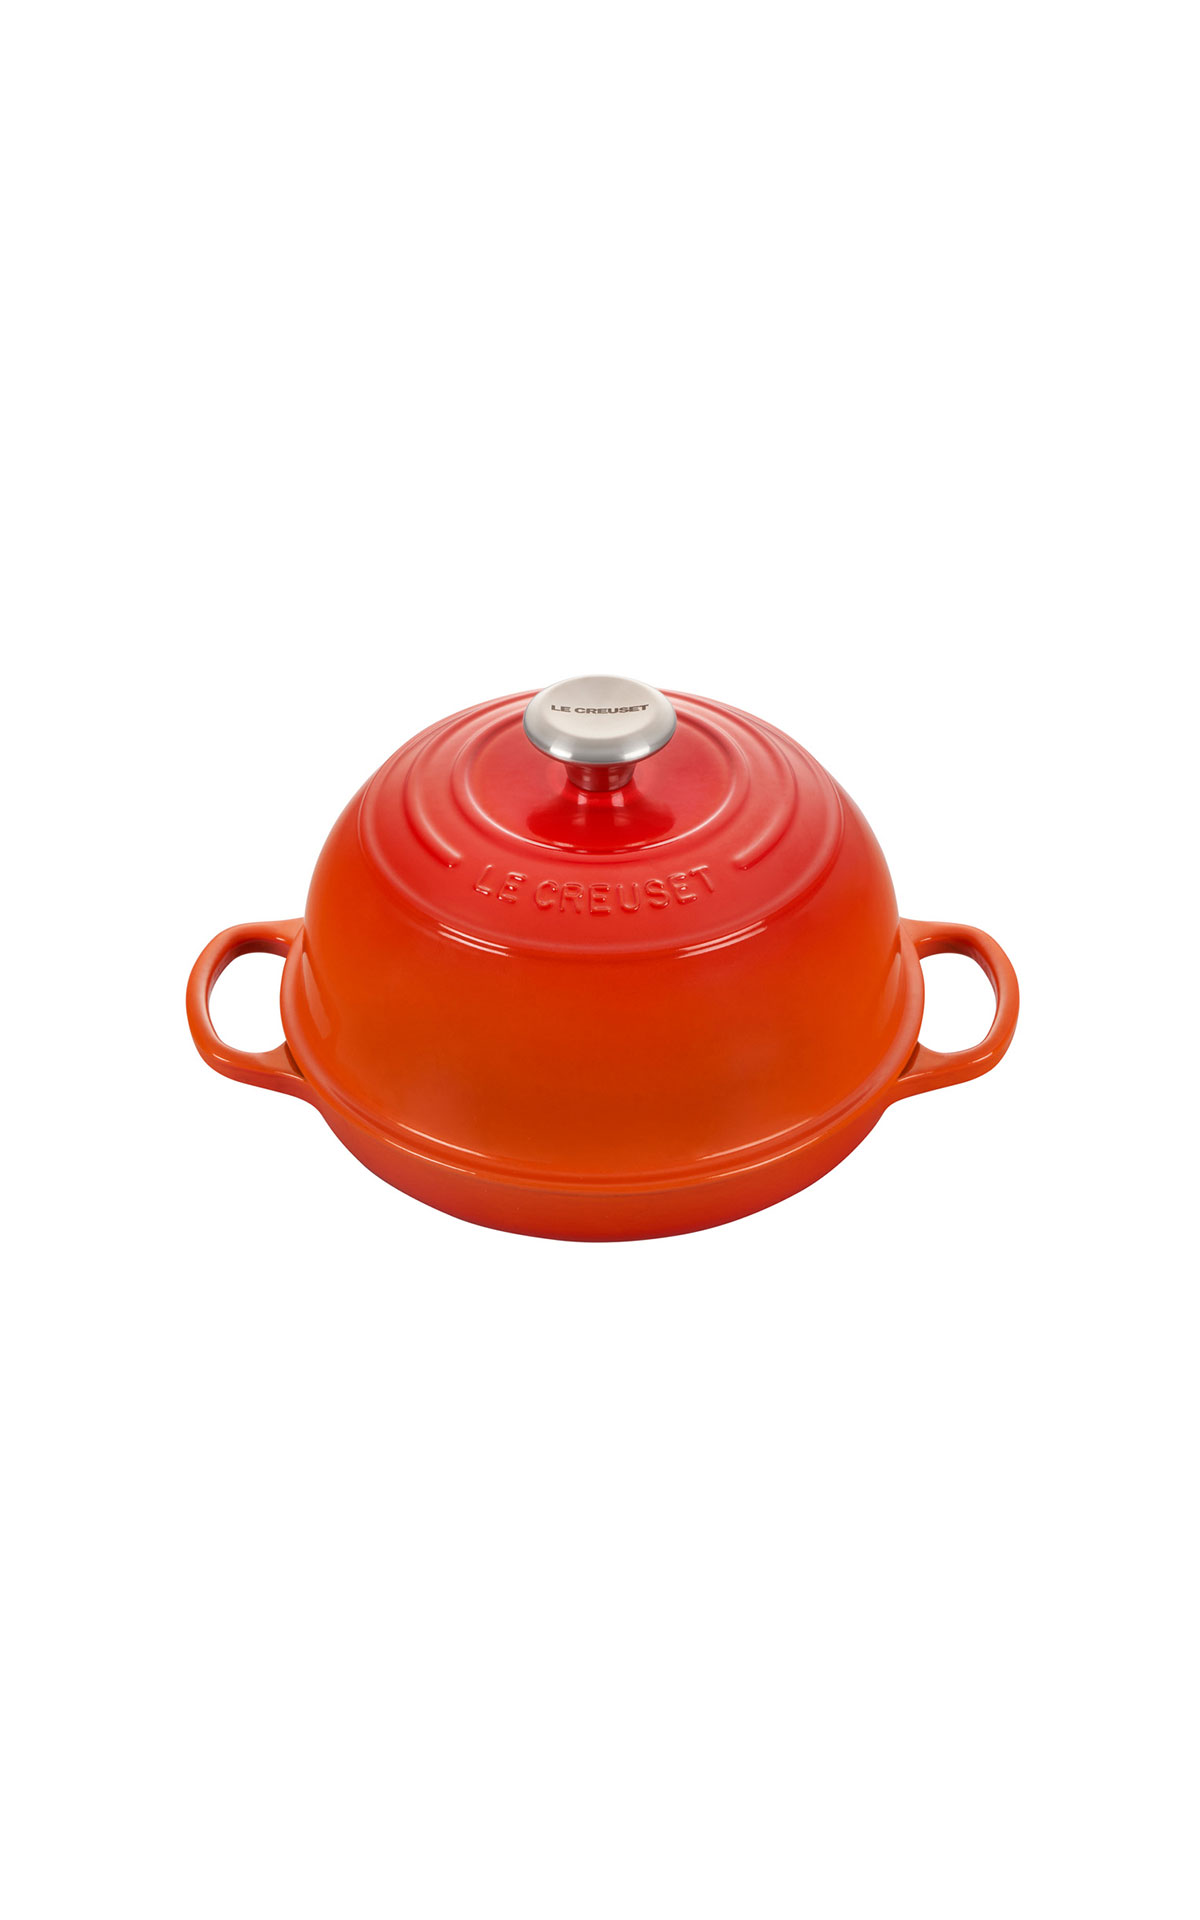 Le Creuset Bread oven cast iron volcanic  from Bicester Village